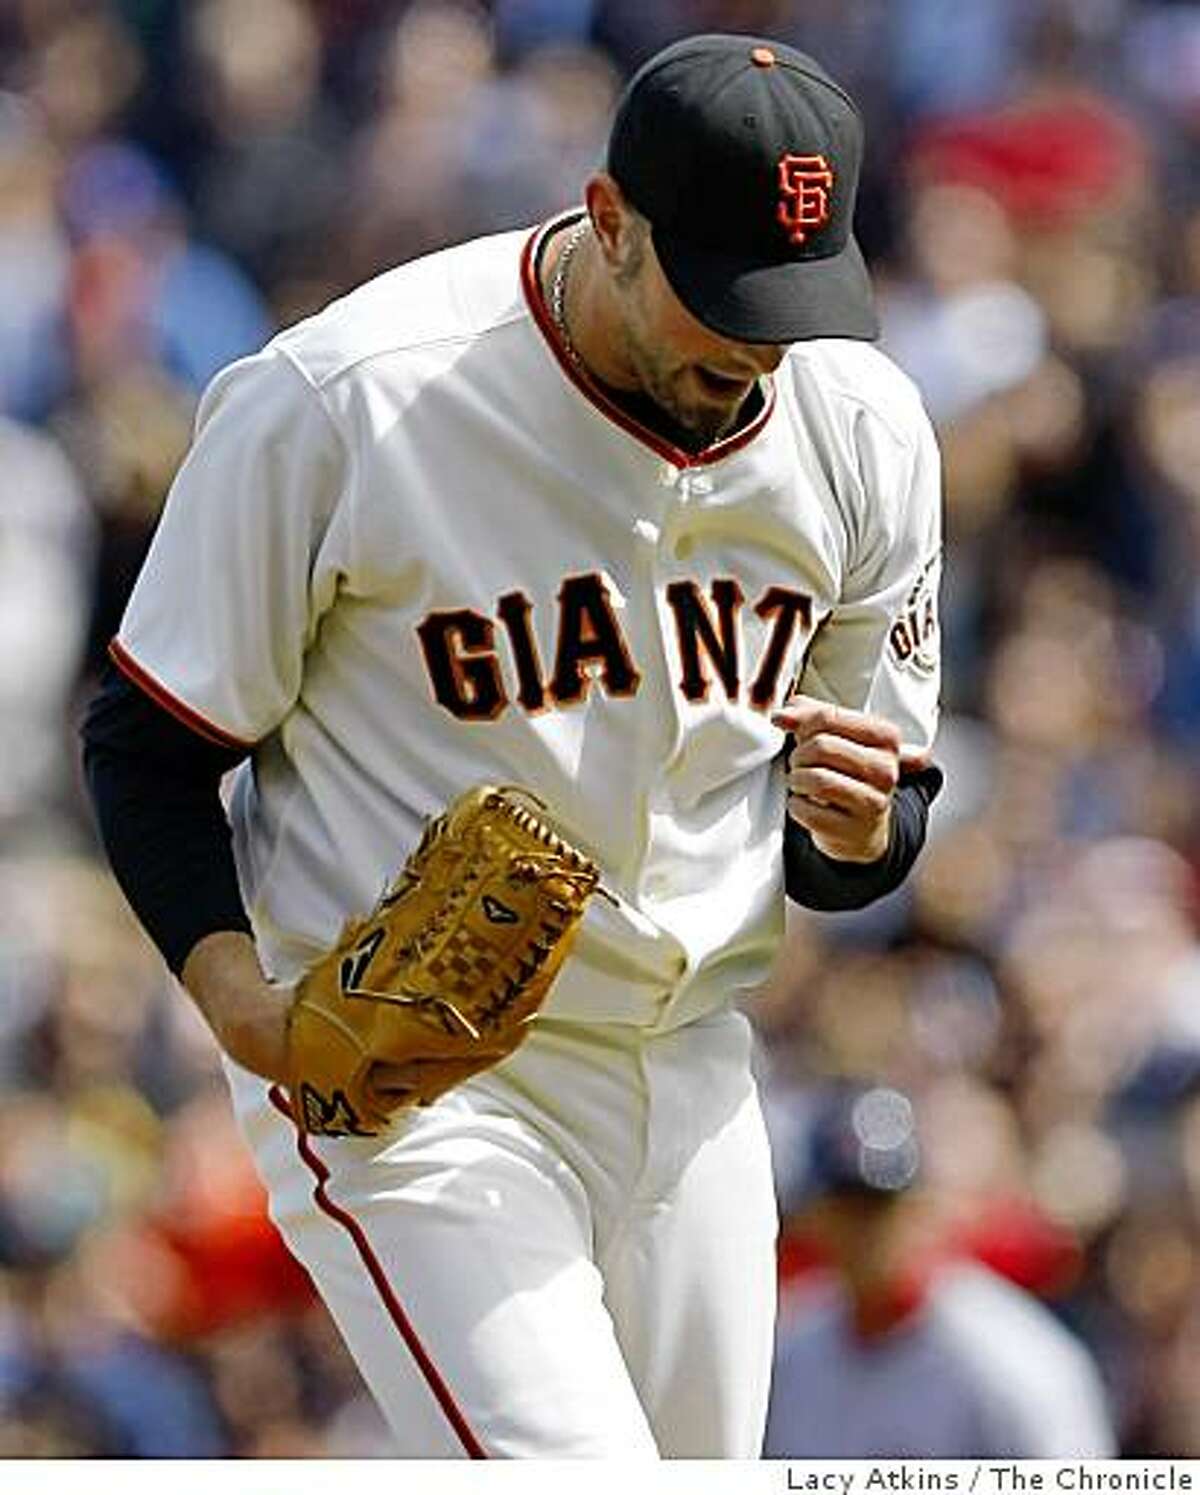 Giants pitcher Jeremy Affeldt reacts after making the third out with St. Louis Cardinal runners in a scoring position in the eighth inning keeping the Giants ahead, Sunday May 31, 2009, in San Francisco, Calif.